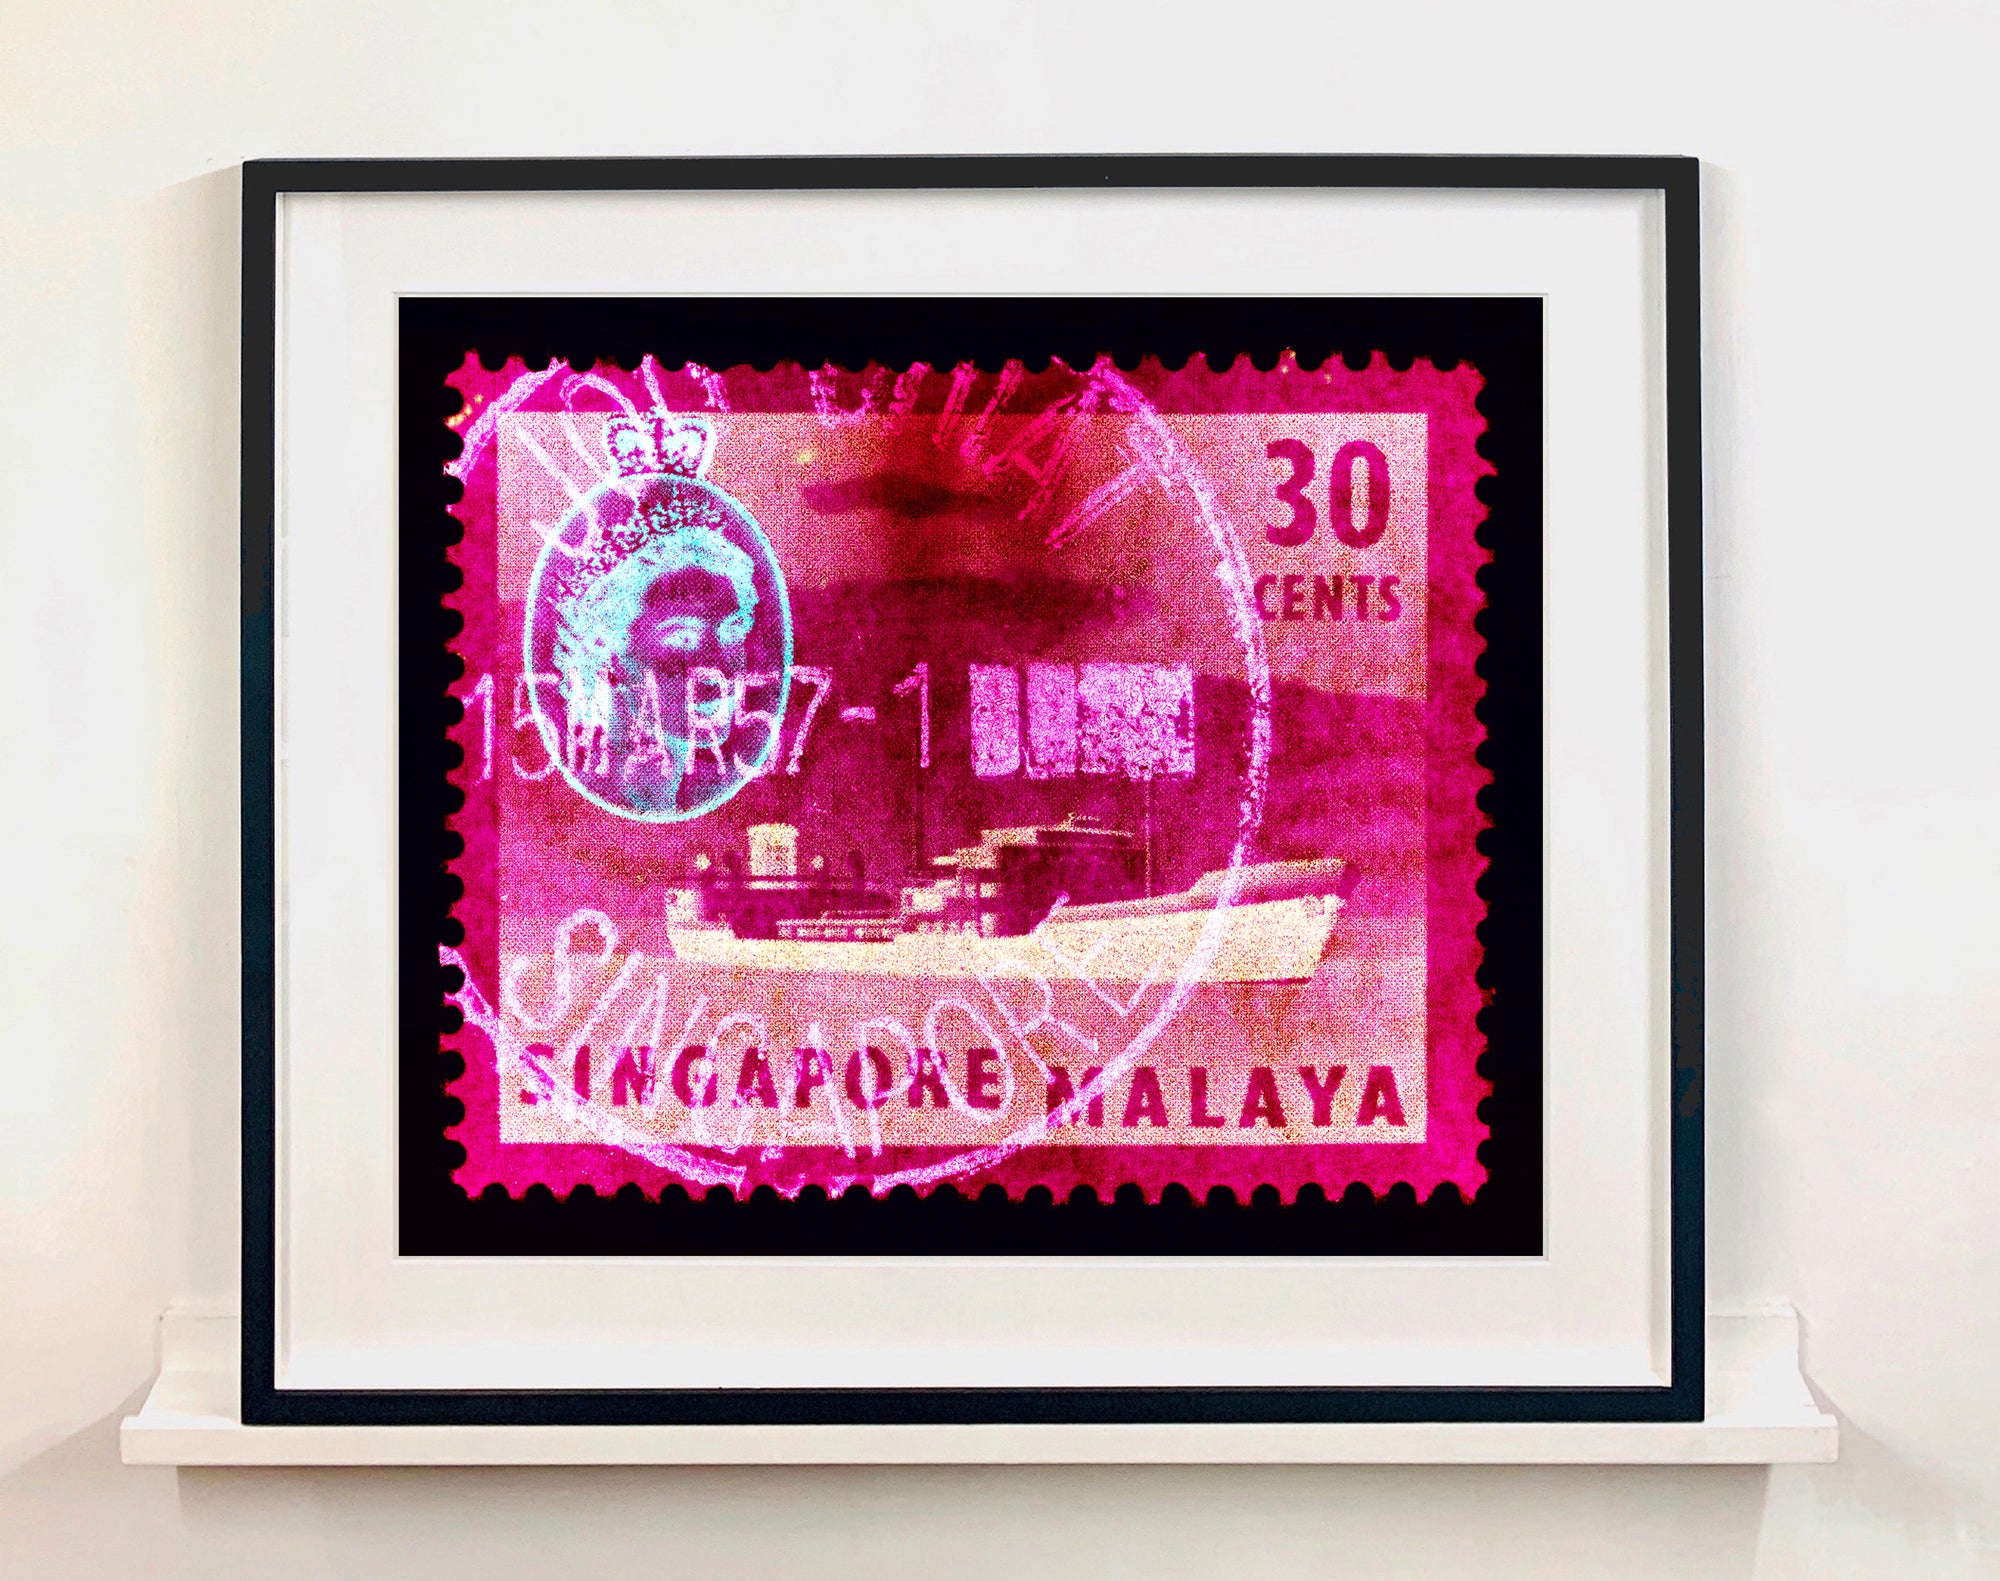 These historic postage stamps that make up the Heidler & Heeps Stamp Collection, Singapore Series 'Postcards from Afar' have been given a twenty-first century pop art lease of life. The fine detailed tapestry of the original small postage stamp has been brought to life, made unique by the franking stamp and Heidler & Heeps specialist darkroom process.